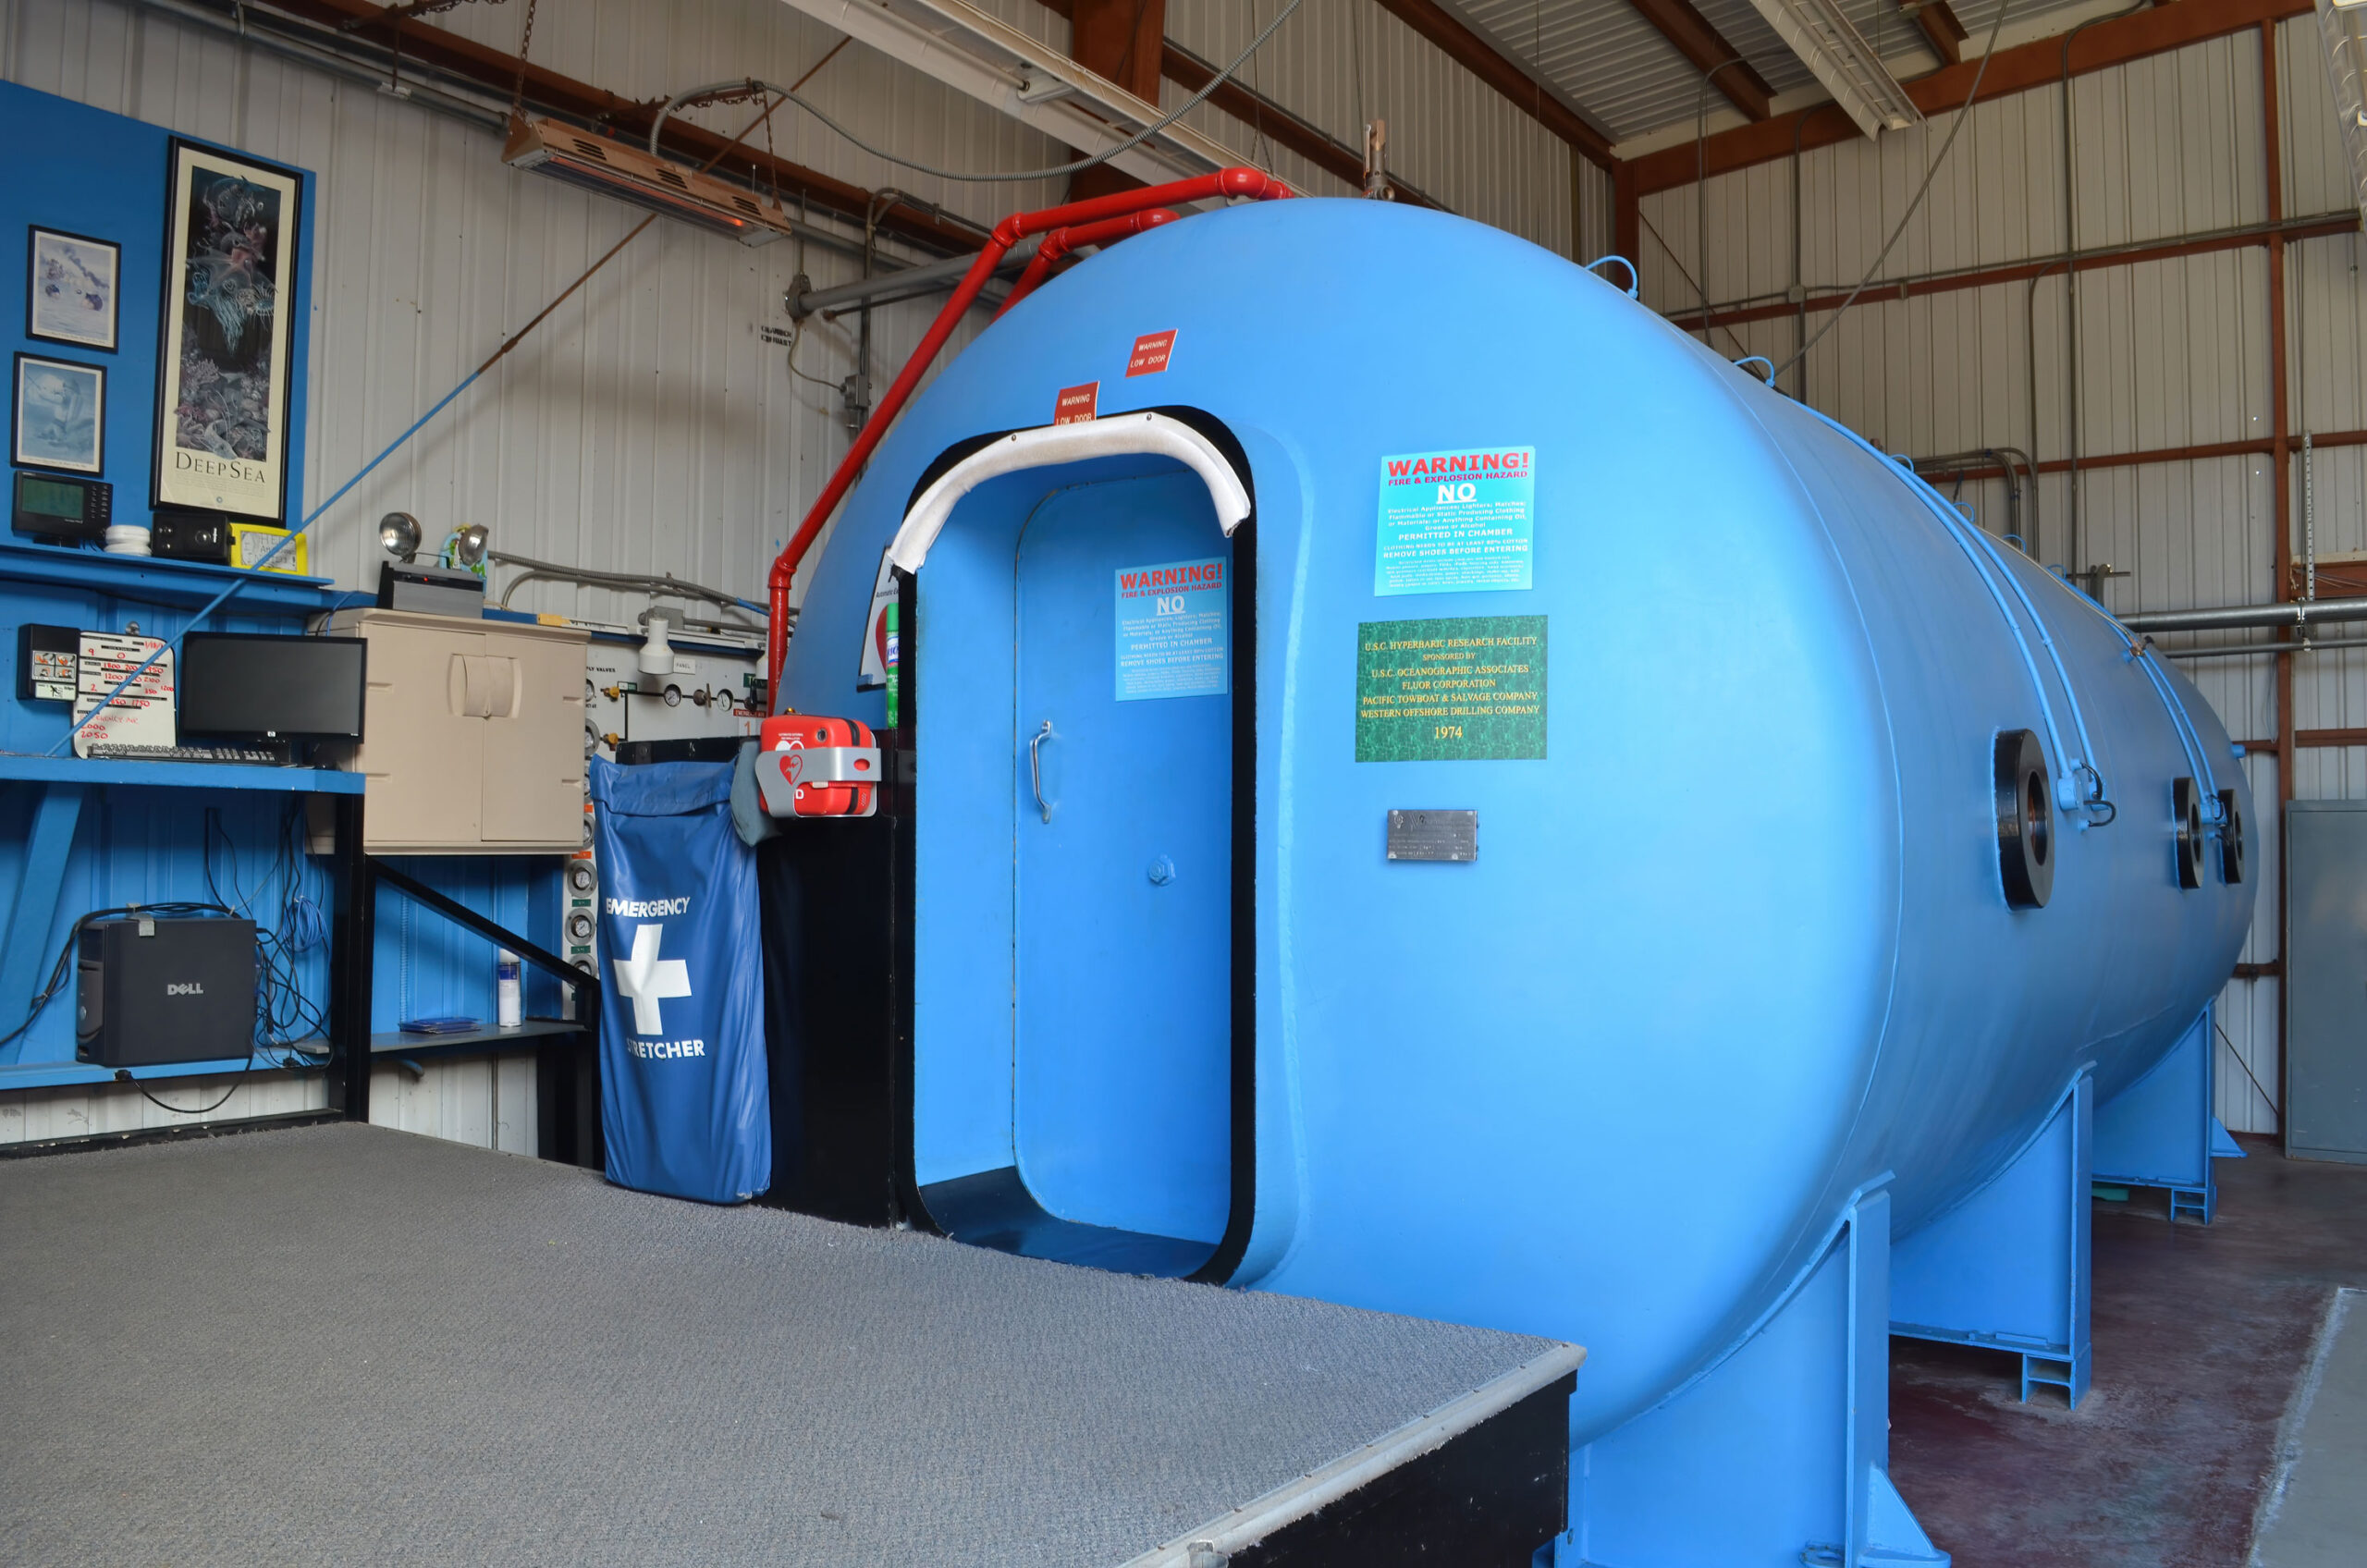 the Catalina Hyperbaric Chamber, a blue cylindrical room designed for treating dive accidents